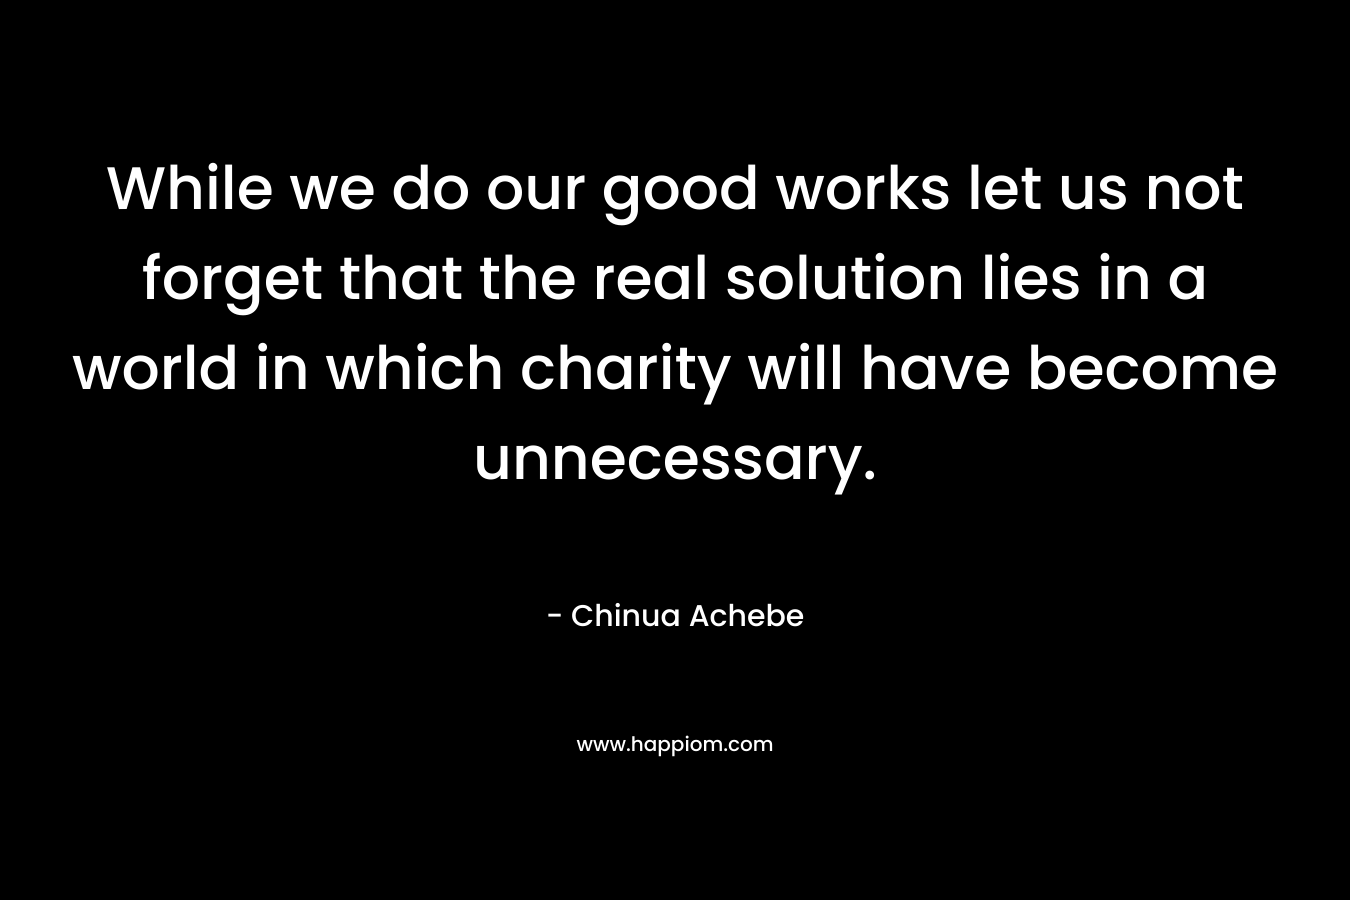 While we do our good works let us not forget that the real solution lies in a world in which charity will have become unnecessary. – Chinua Achebe